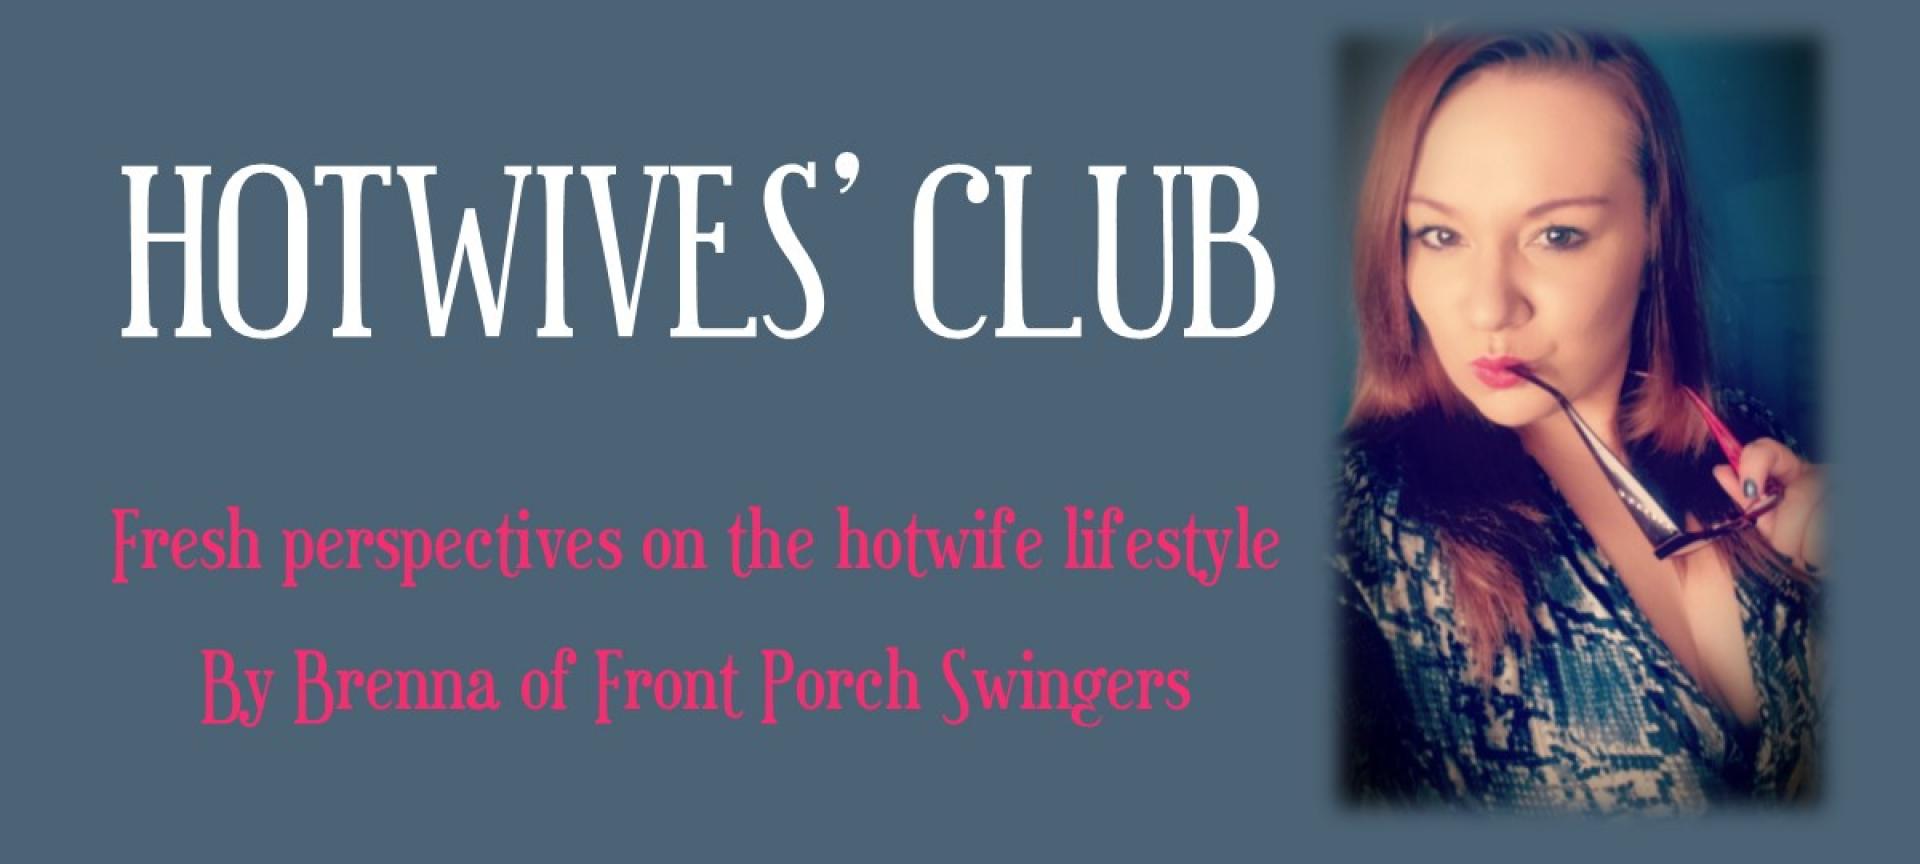 ASN Lifestyle Magazine Hotwives_Club Brenna_Front_Porch_Swingers